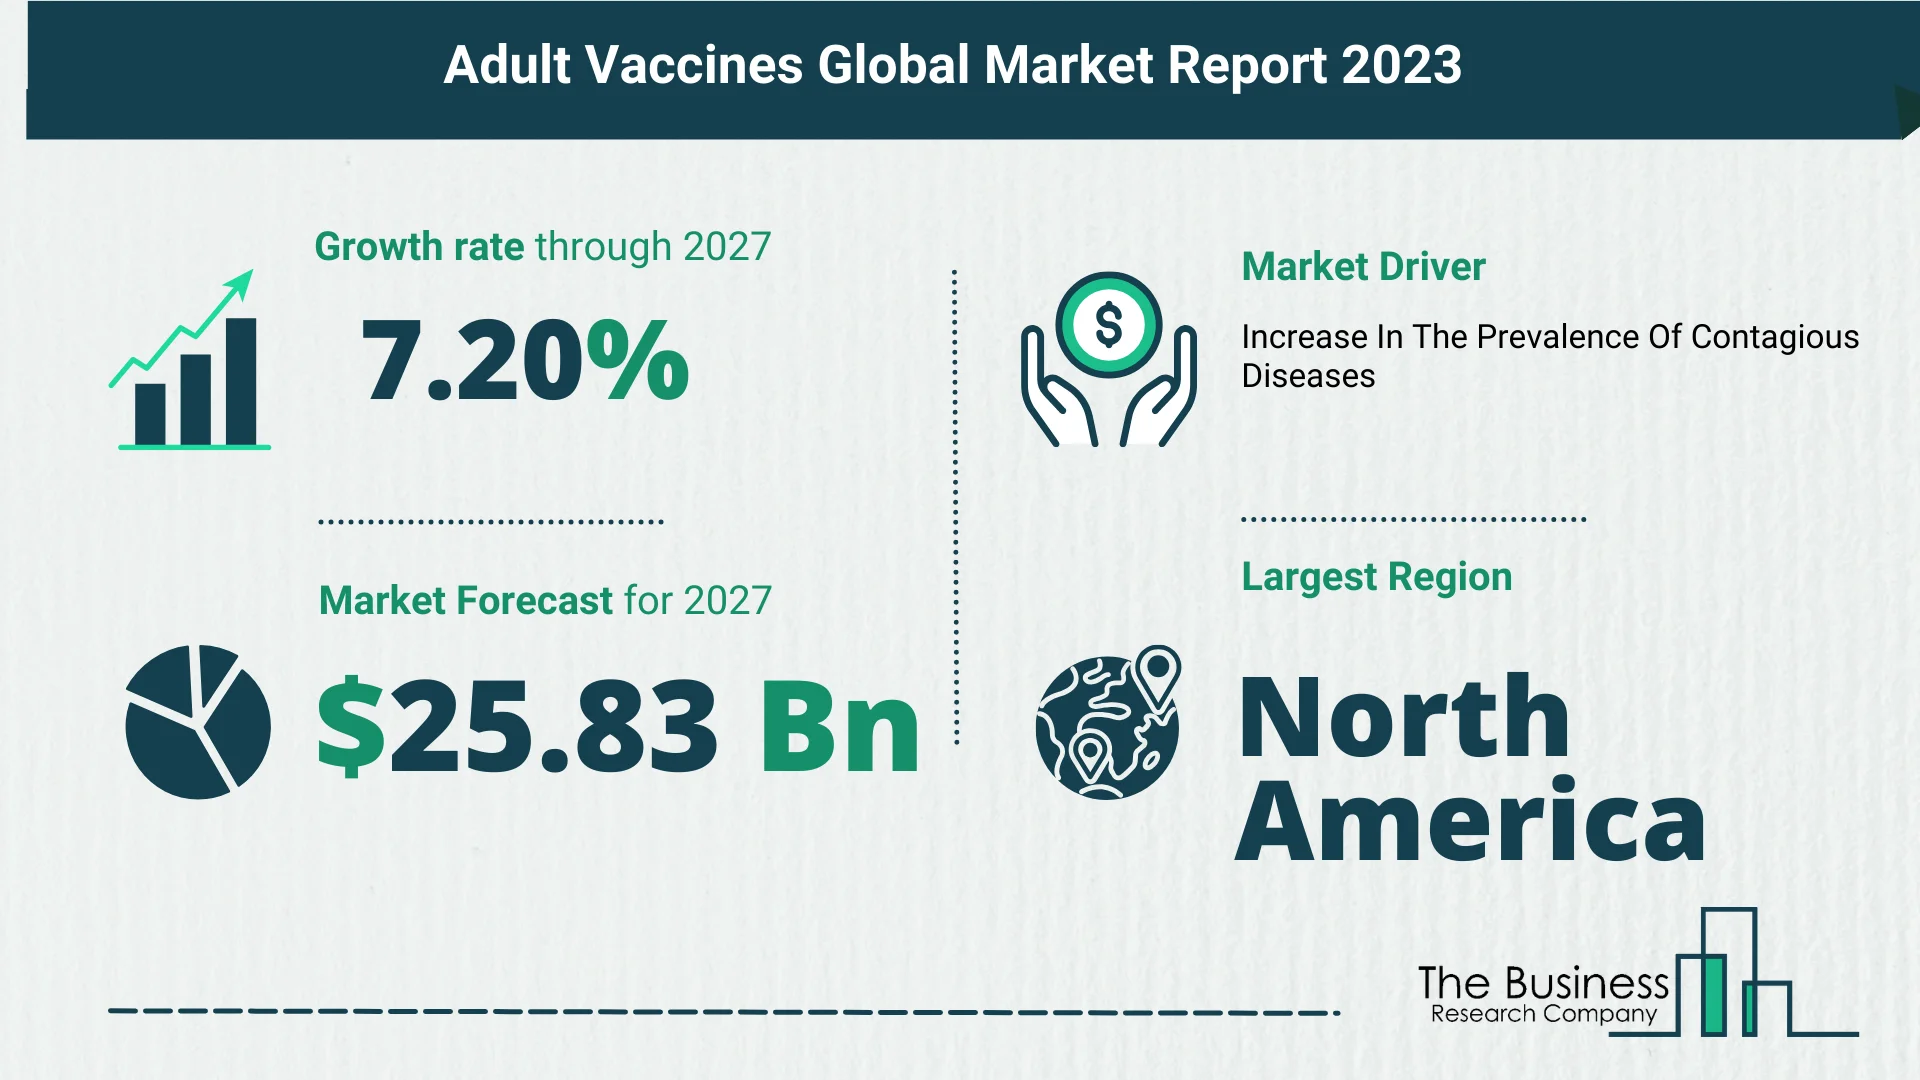 Global Adult Vaccines Market Analysis: Estimated Market Size And Growth Rate